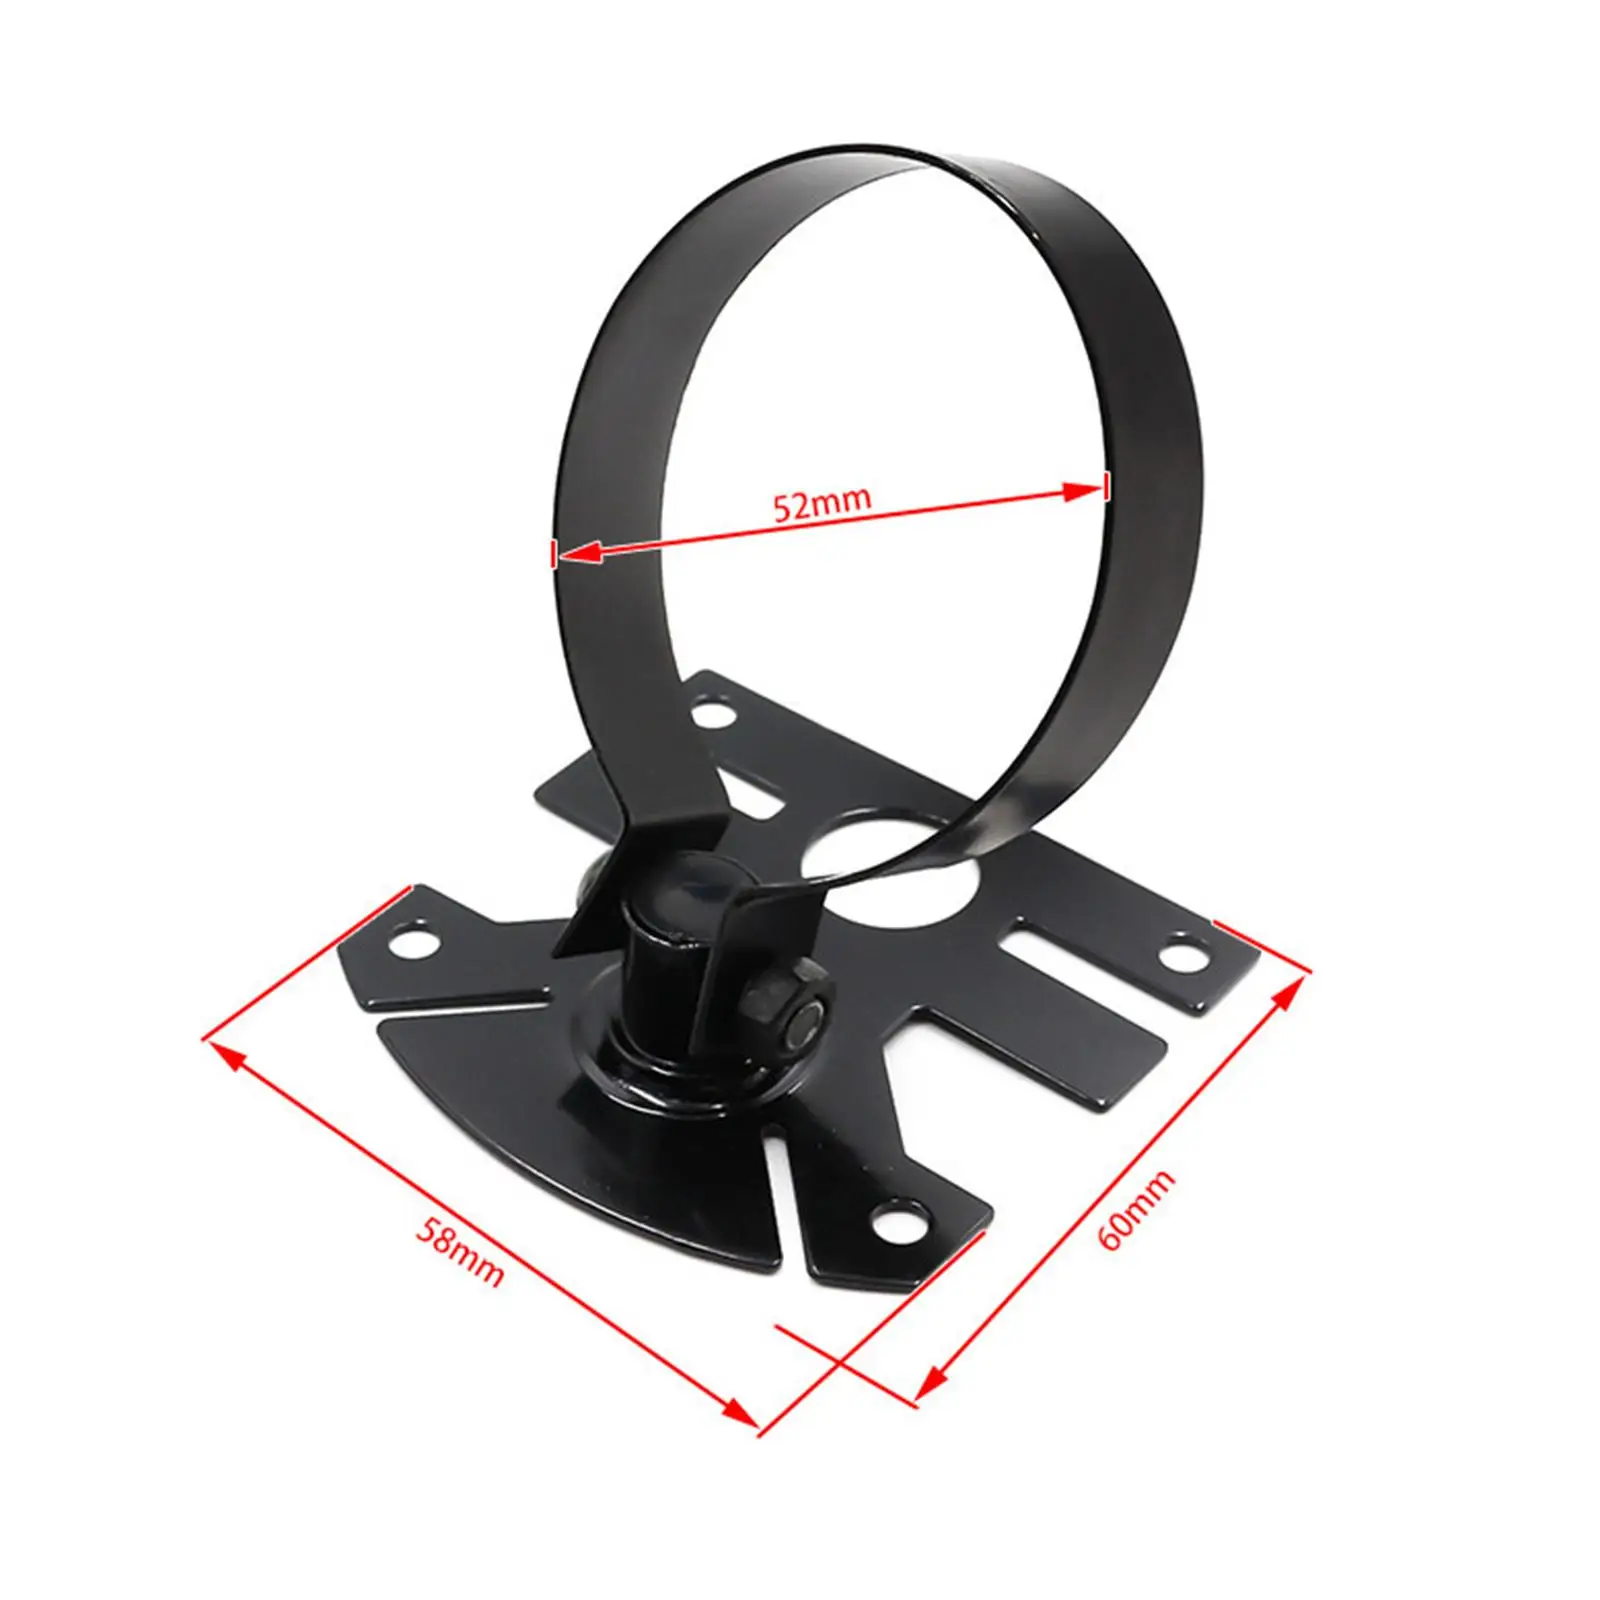 Car Gauge Meter Stand Meter Holder Universal 2inch/52mm Iron Meter Mount Stand for Automobile Accessory Replaces Durable